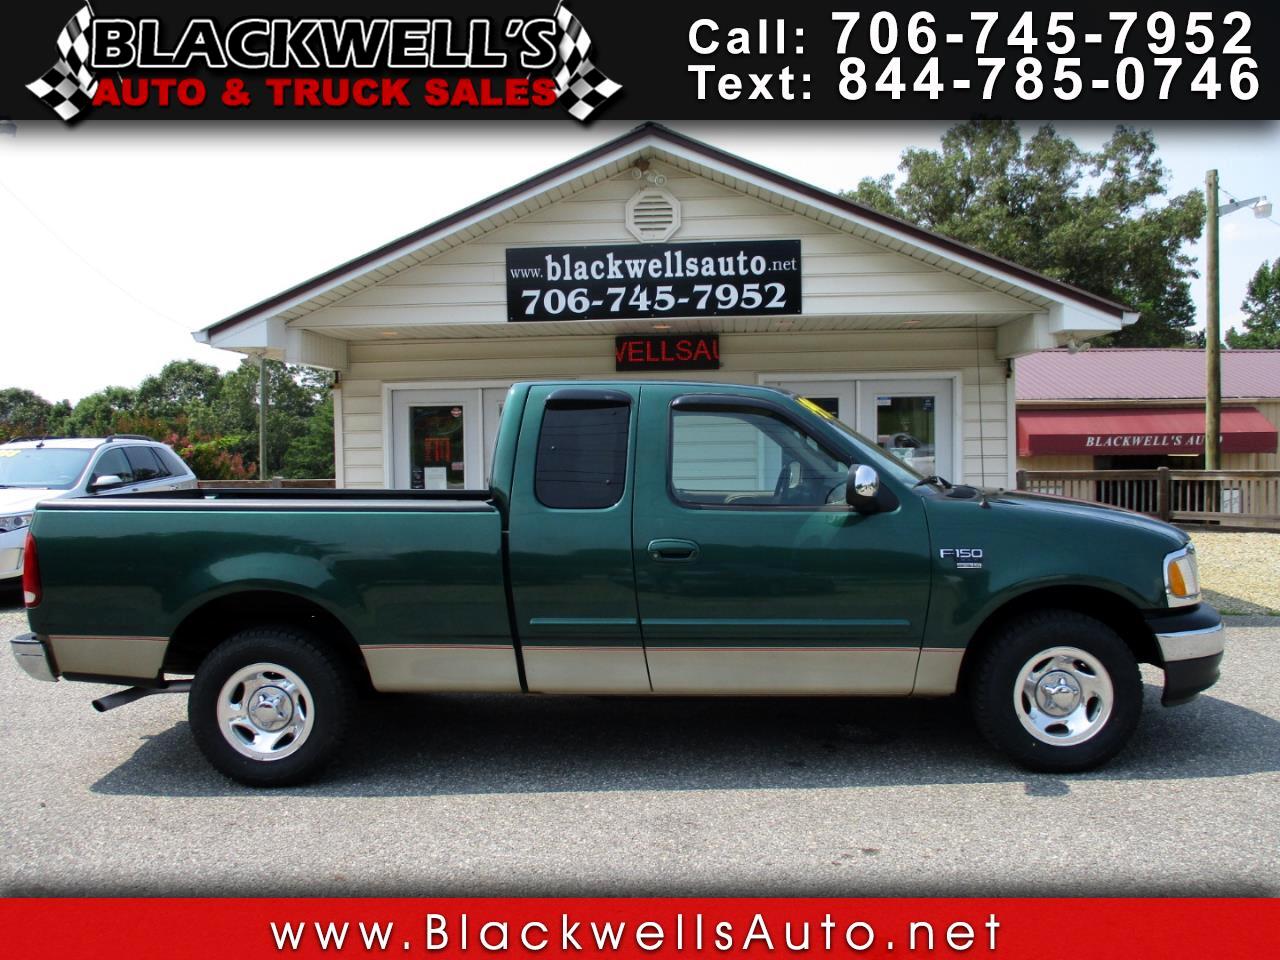 Used 1999 Ford F-150 Supercab 139" XLT for Sale in Blairsville GA 30512 1999 Ford E 150 Towing Capacity